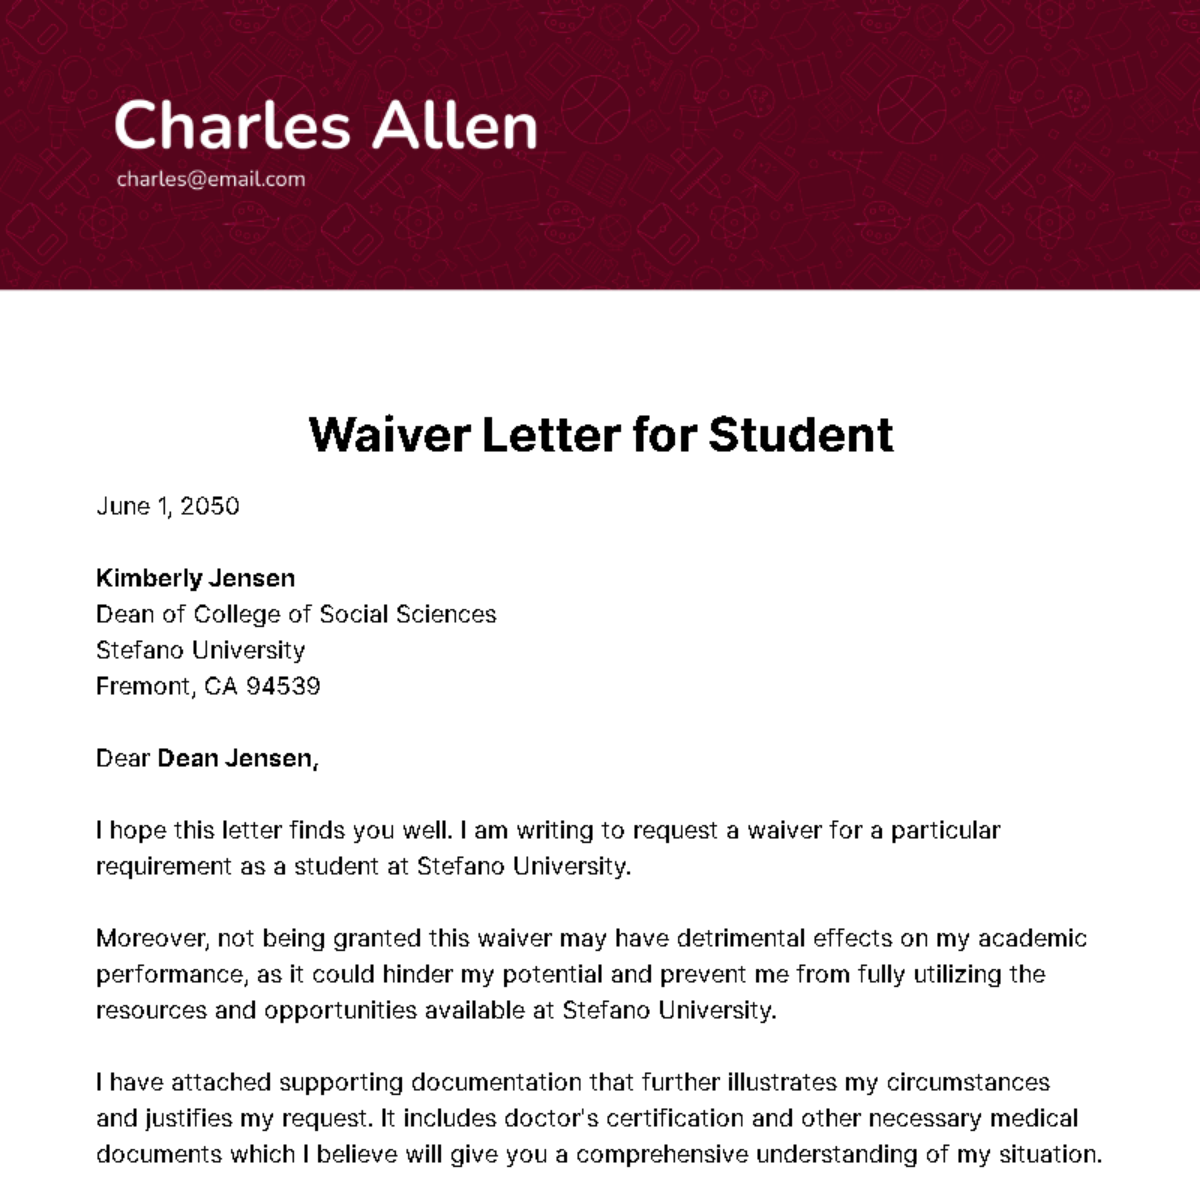 Waiver Letter for Student Template